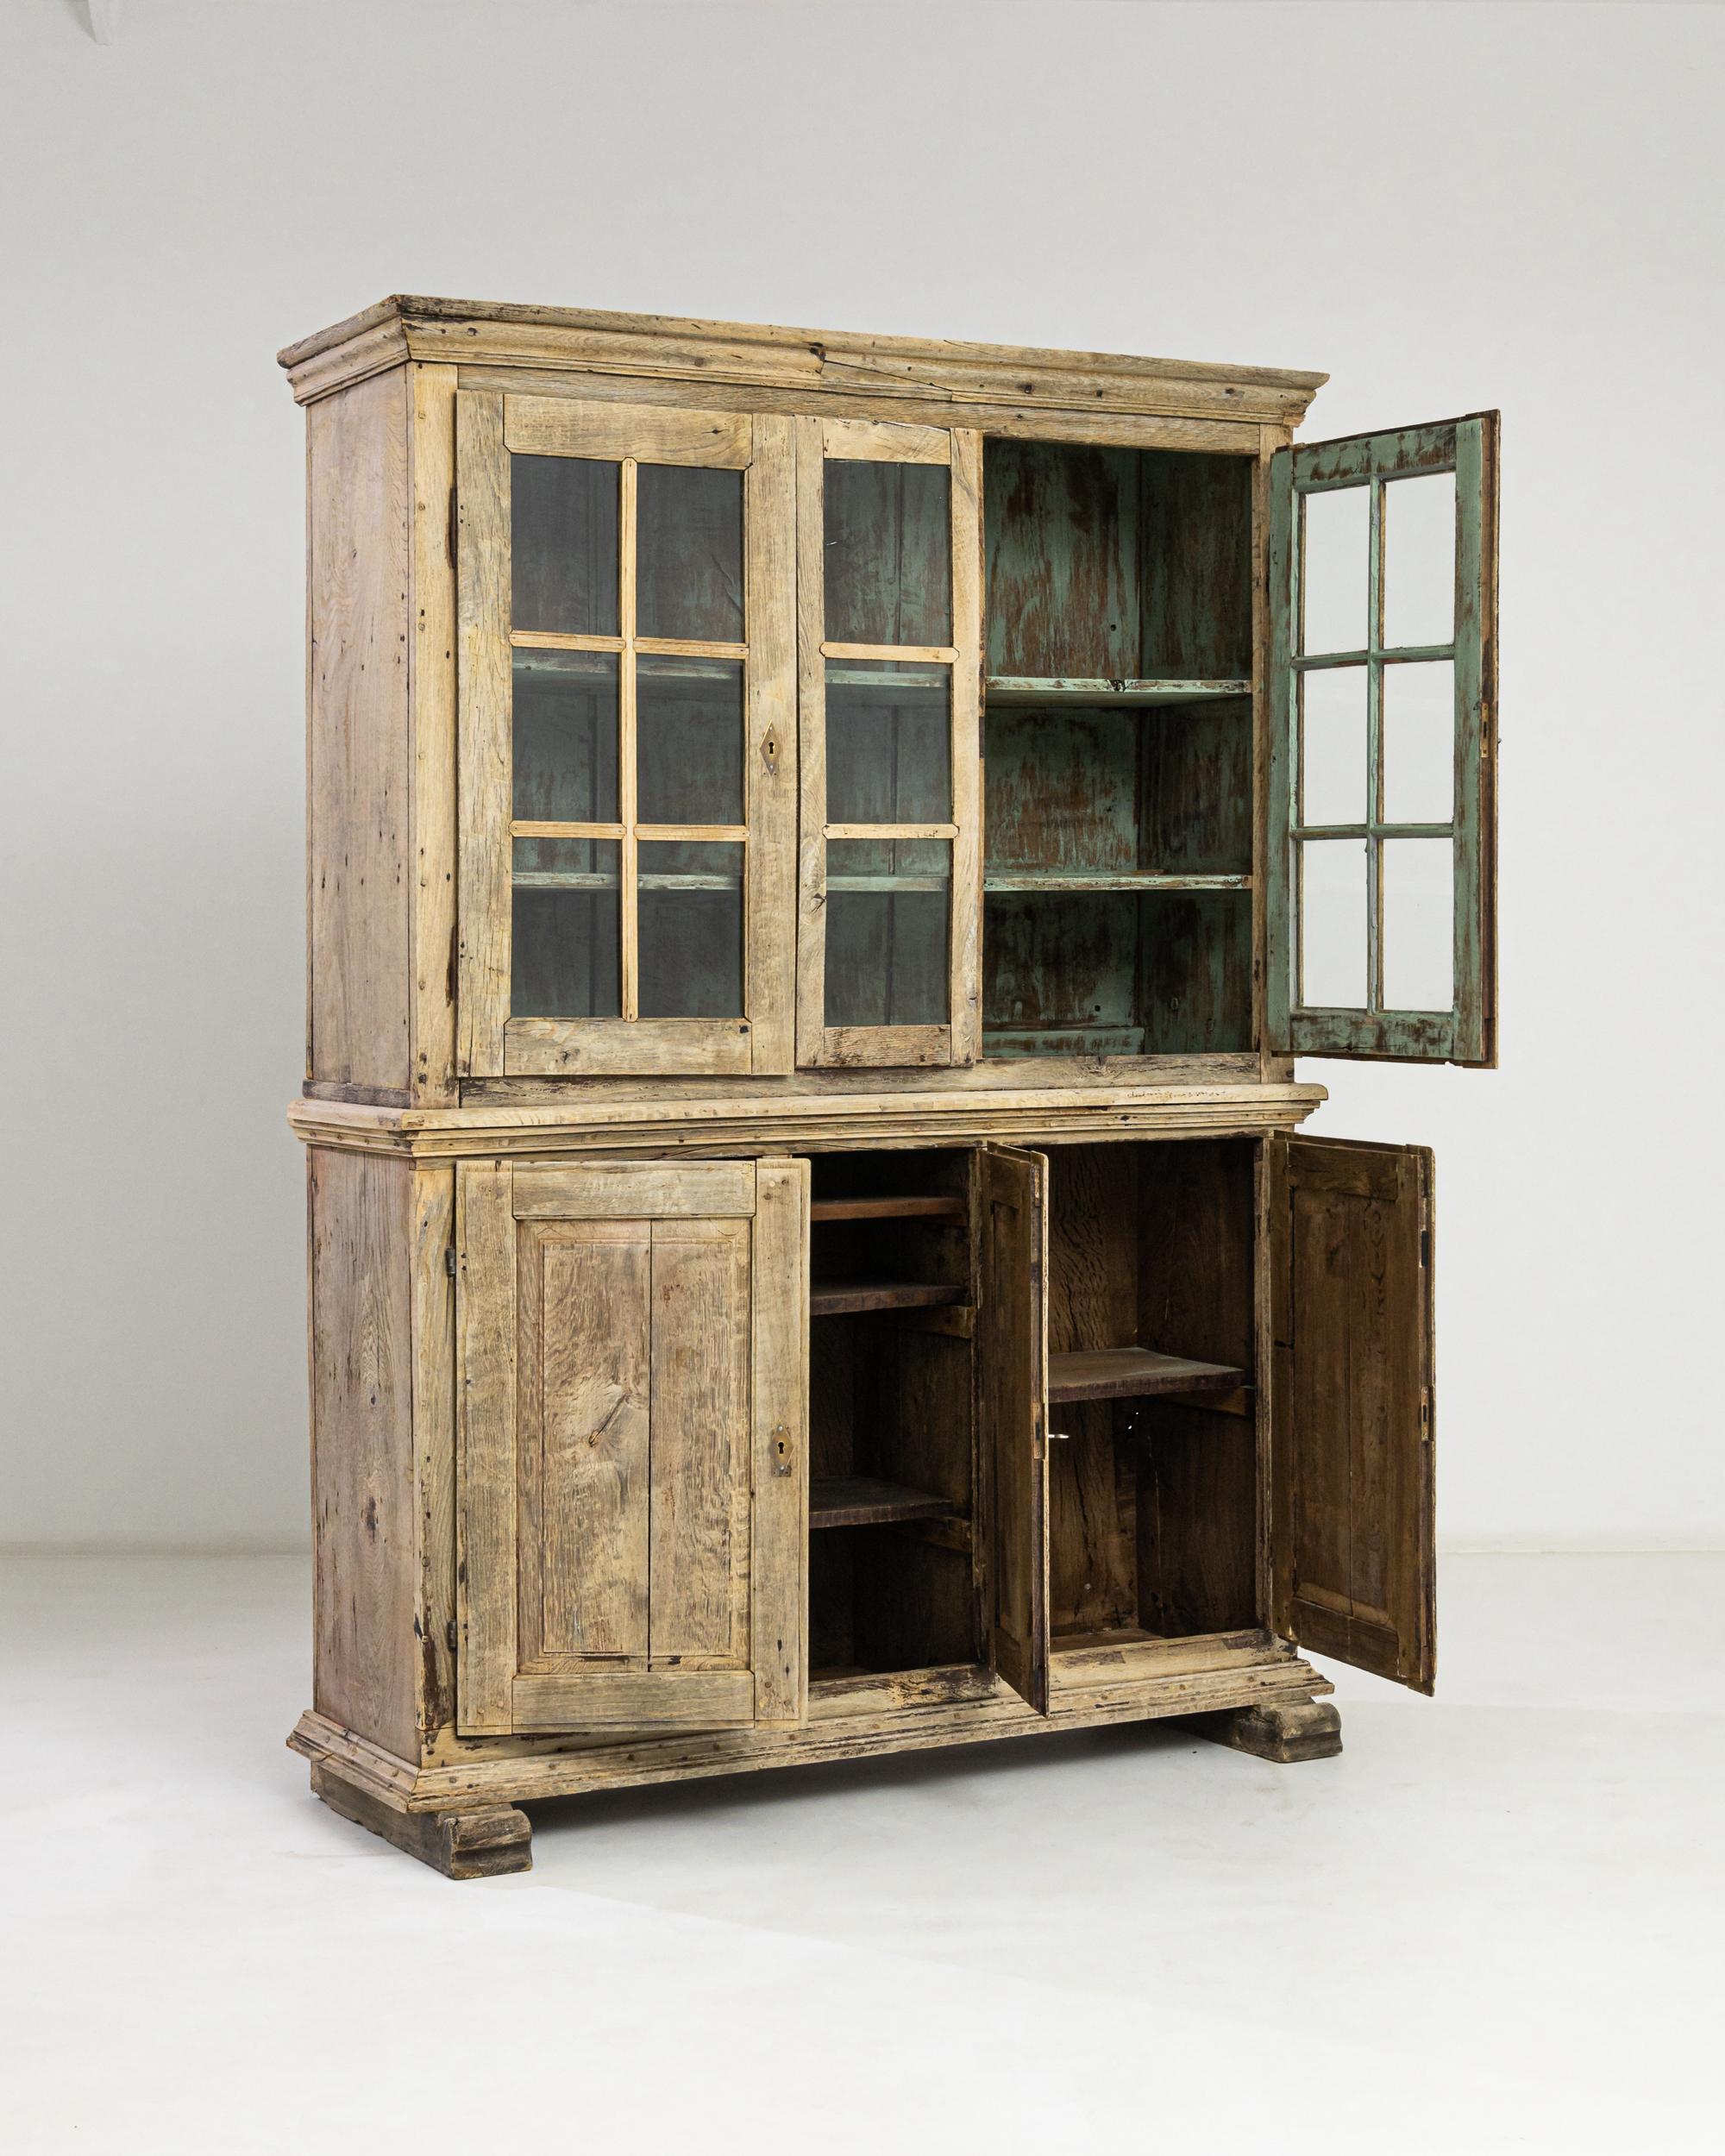 1840s German Bleached Oak Vitrine In Good Condition For Sale In High Point, NC